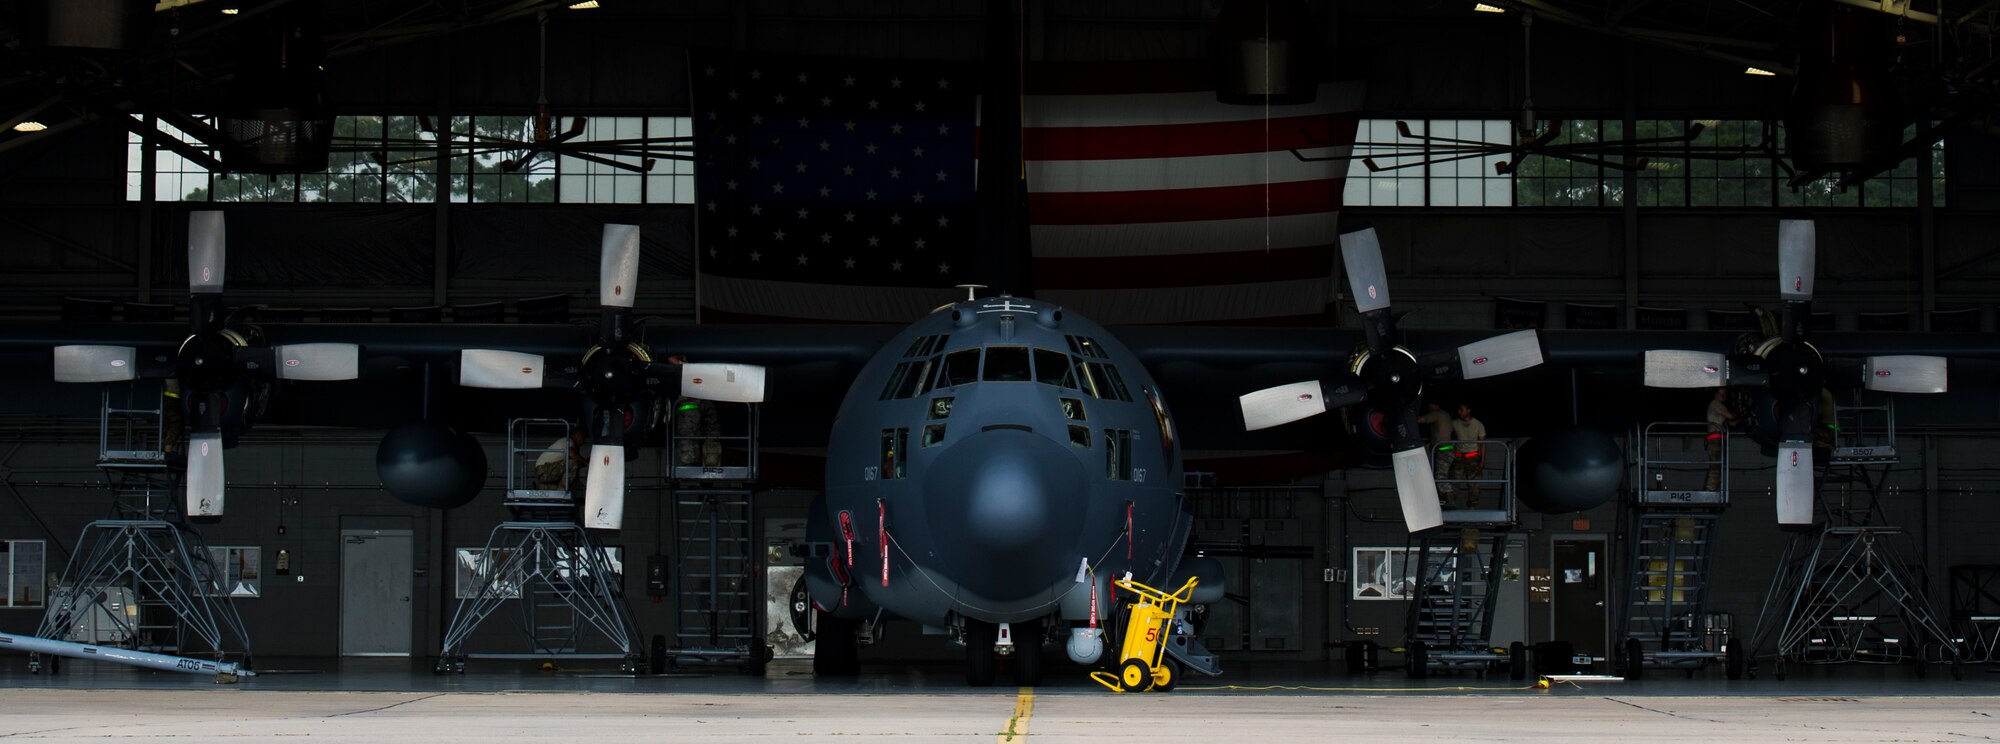 Aerospace propulsion technicians with the 1st Special Operations Aircraft Maintenance Squadron conducted maintenance on an AC-130U Spooky gunship here, July 6, 2017. Aerospace propulsion technicians test, maintain and repair AC-130U engines, preparing them to execute the mission any time, any place. The AC-130U is one of the Air Force’s premiere multi-role aircraft. It is used for missions such as close air support, air interdiction and armed reconnaissance. (U.S. Air Force photo by Airman 1st Class Joseph Pick)